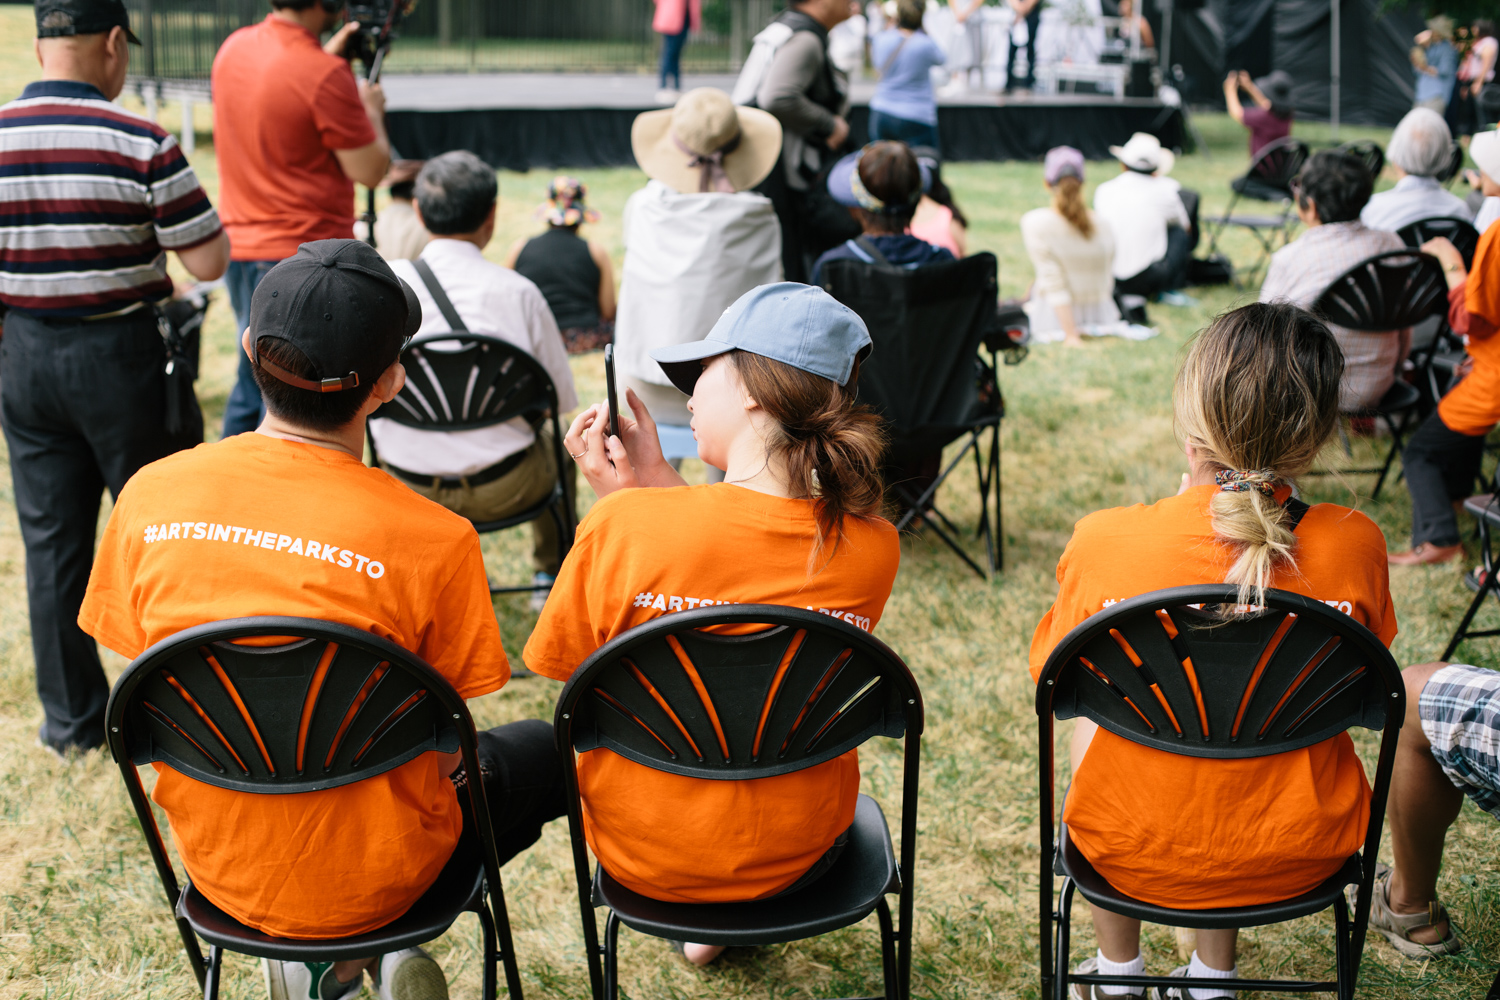 Three volunteers in orange shirts sit in chairs with the audience.